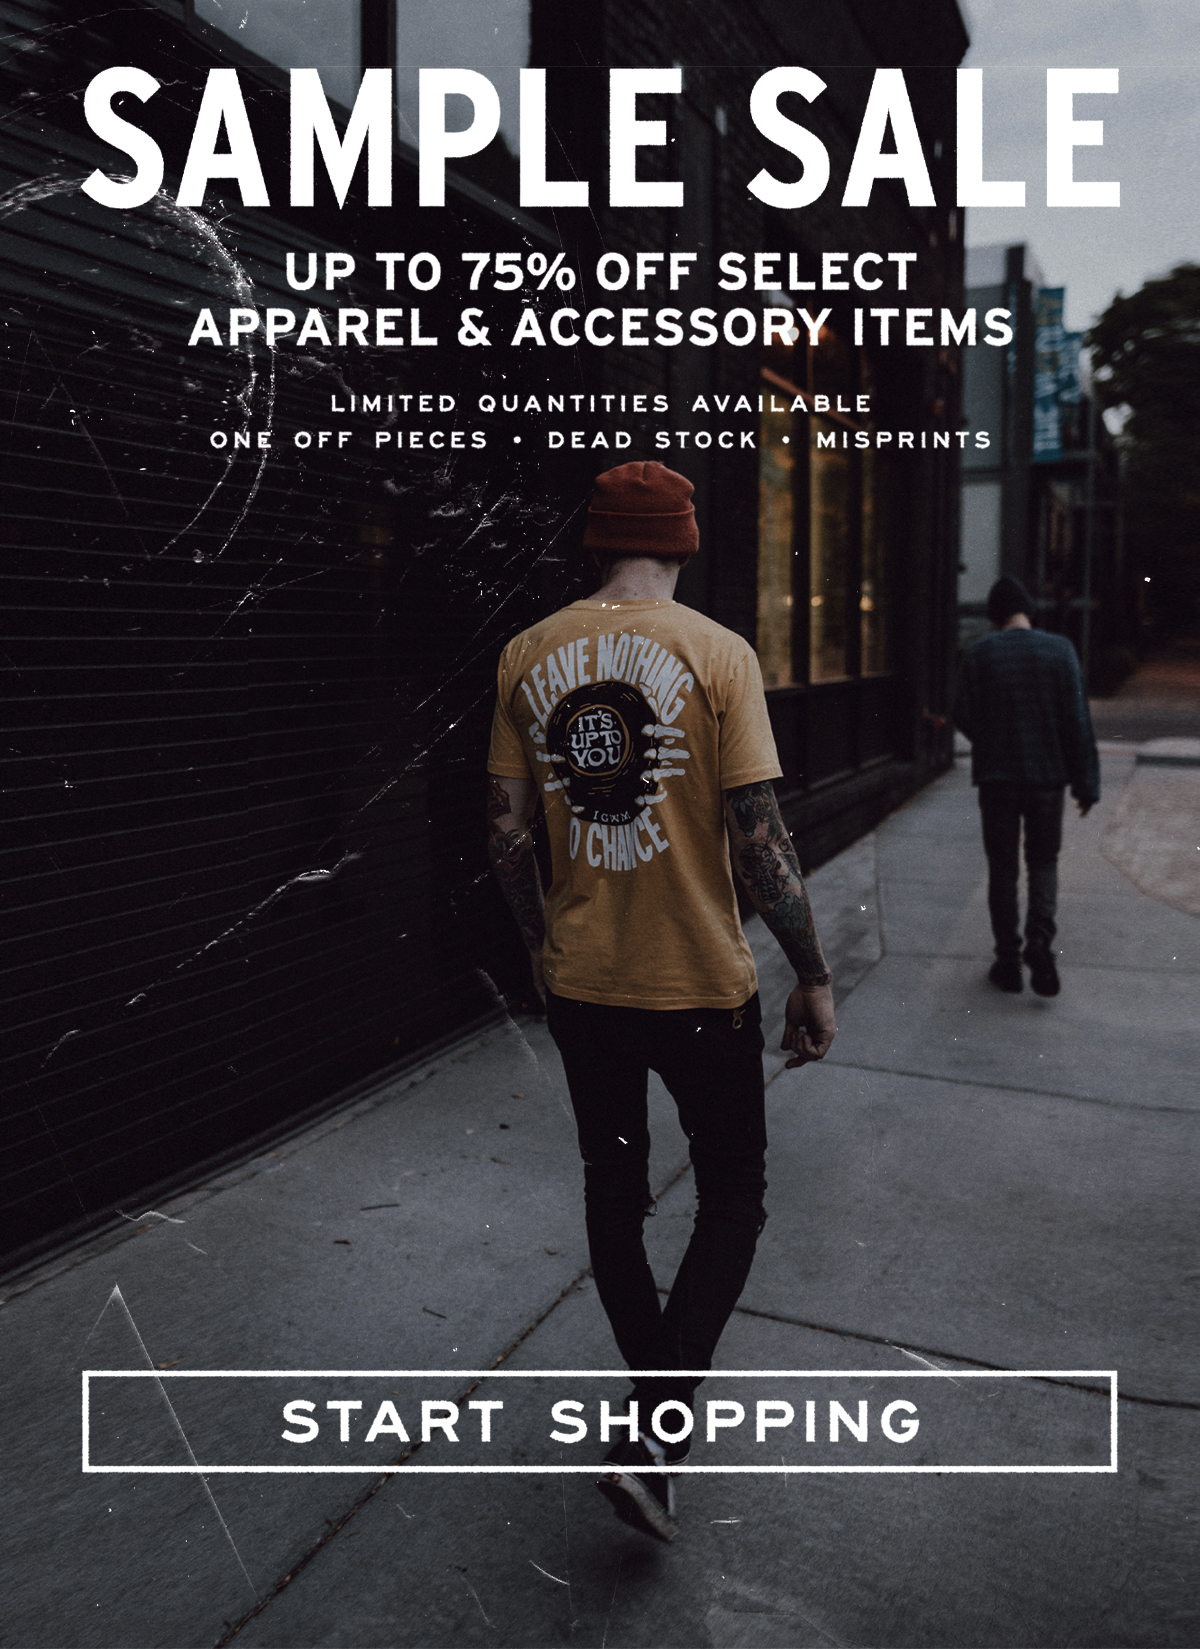 Sample Sale - up to 75% off select apparel & accessory items. 